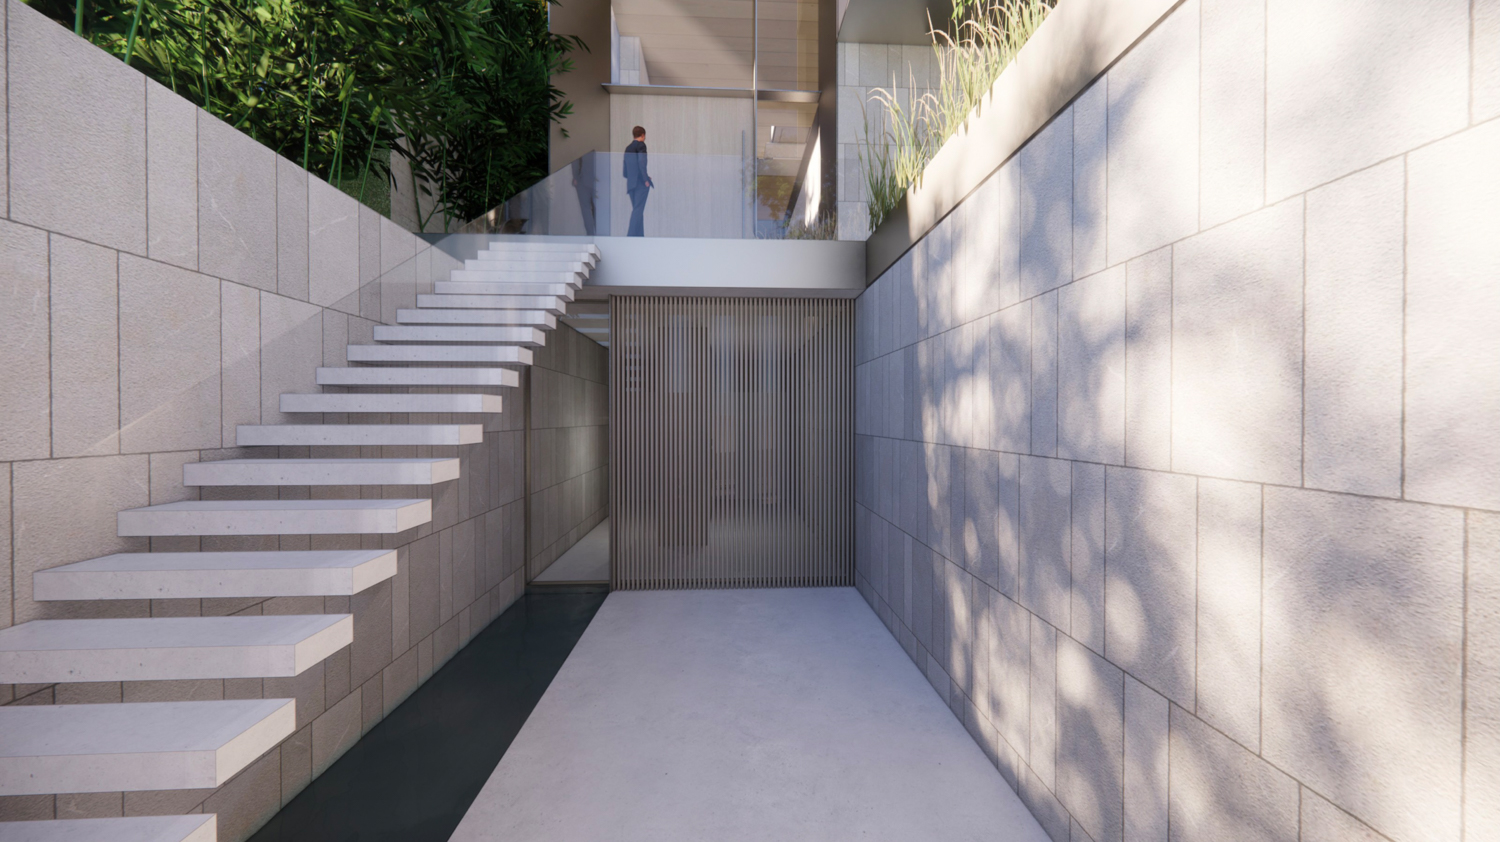 2915 Vallejo Street entry, rendering by Dumican Mosey Architects